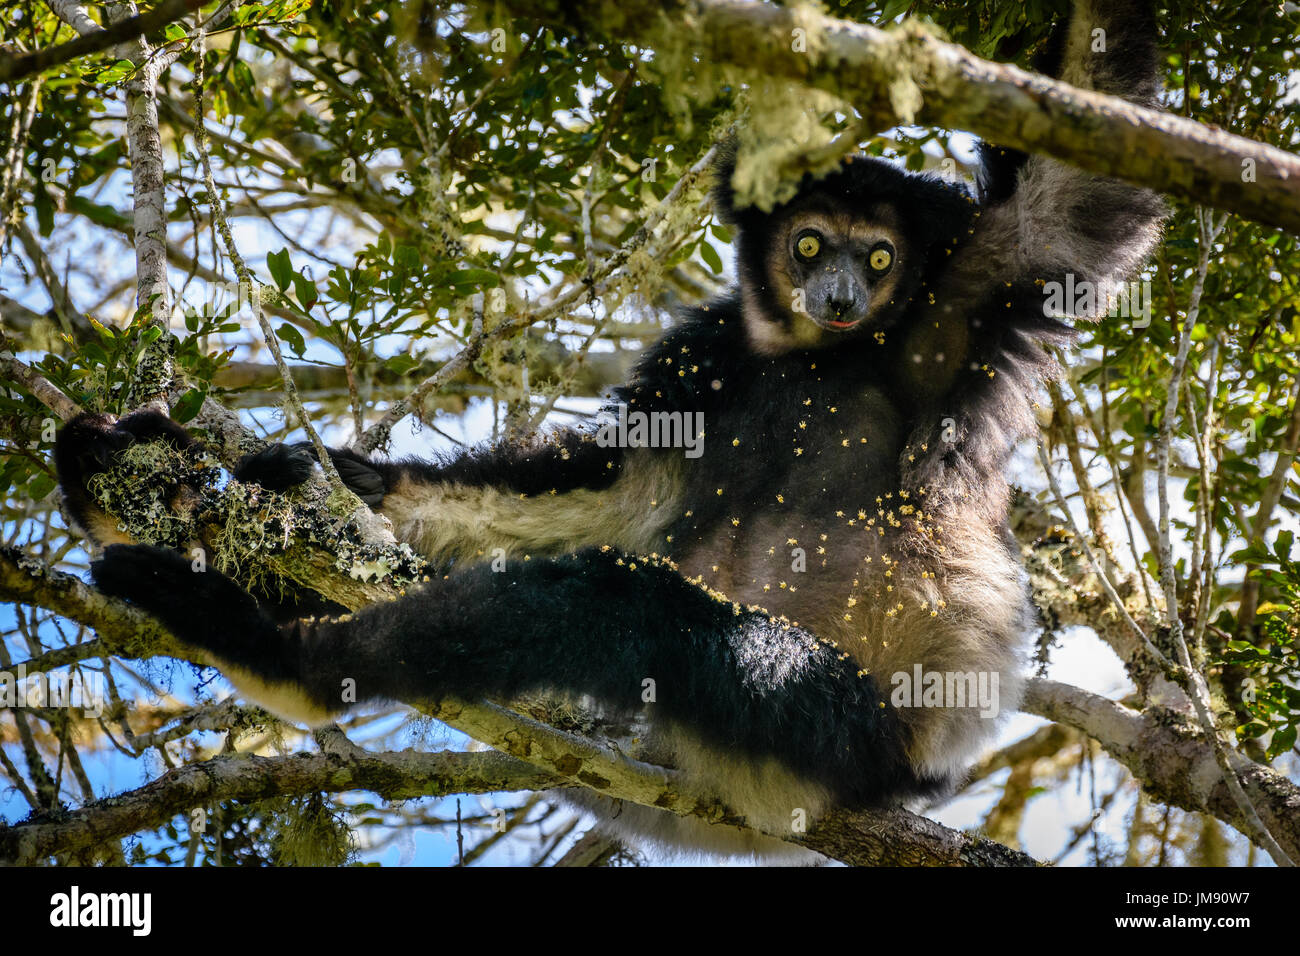 Endangered Indri Lemur hanging in tree canopy looking at camera surrounded by leaves and flowers Stock Photo